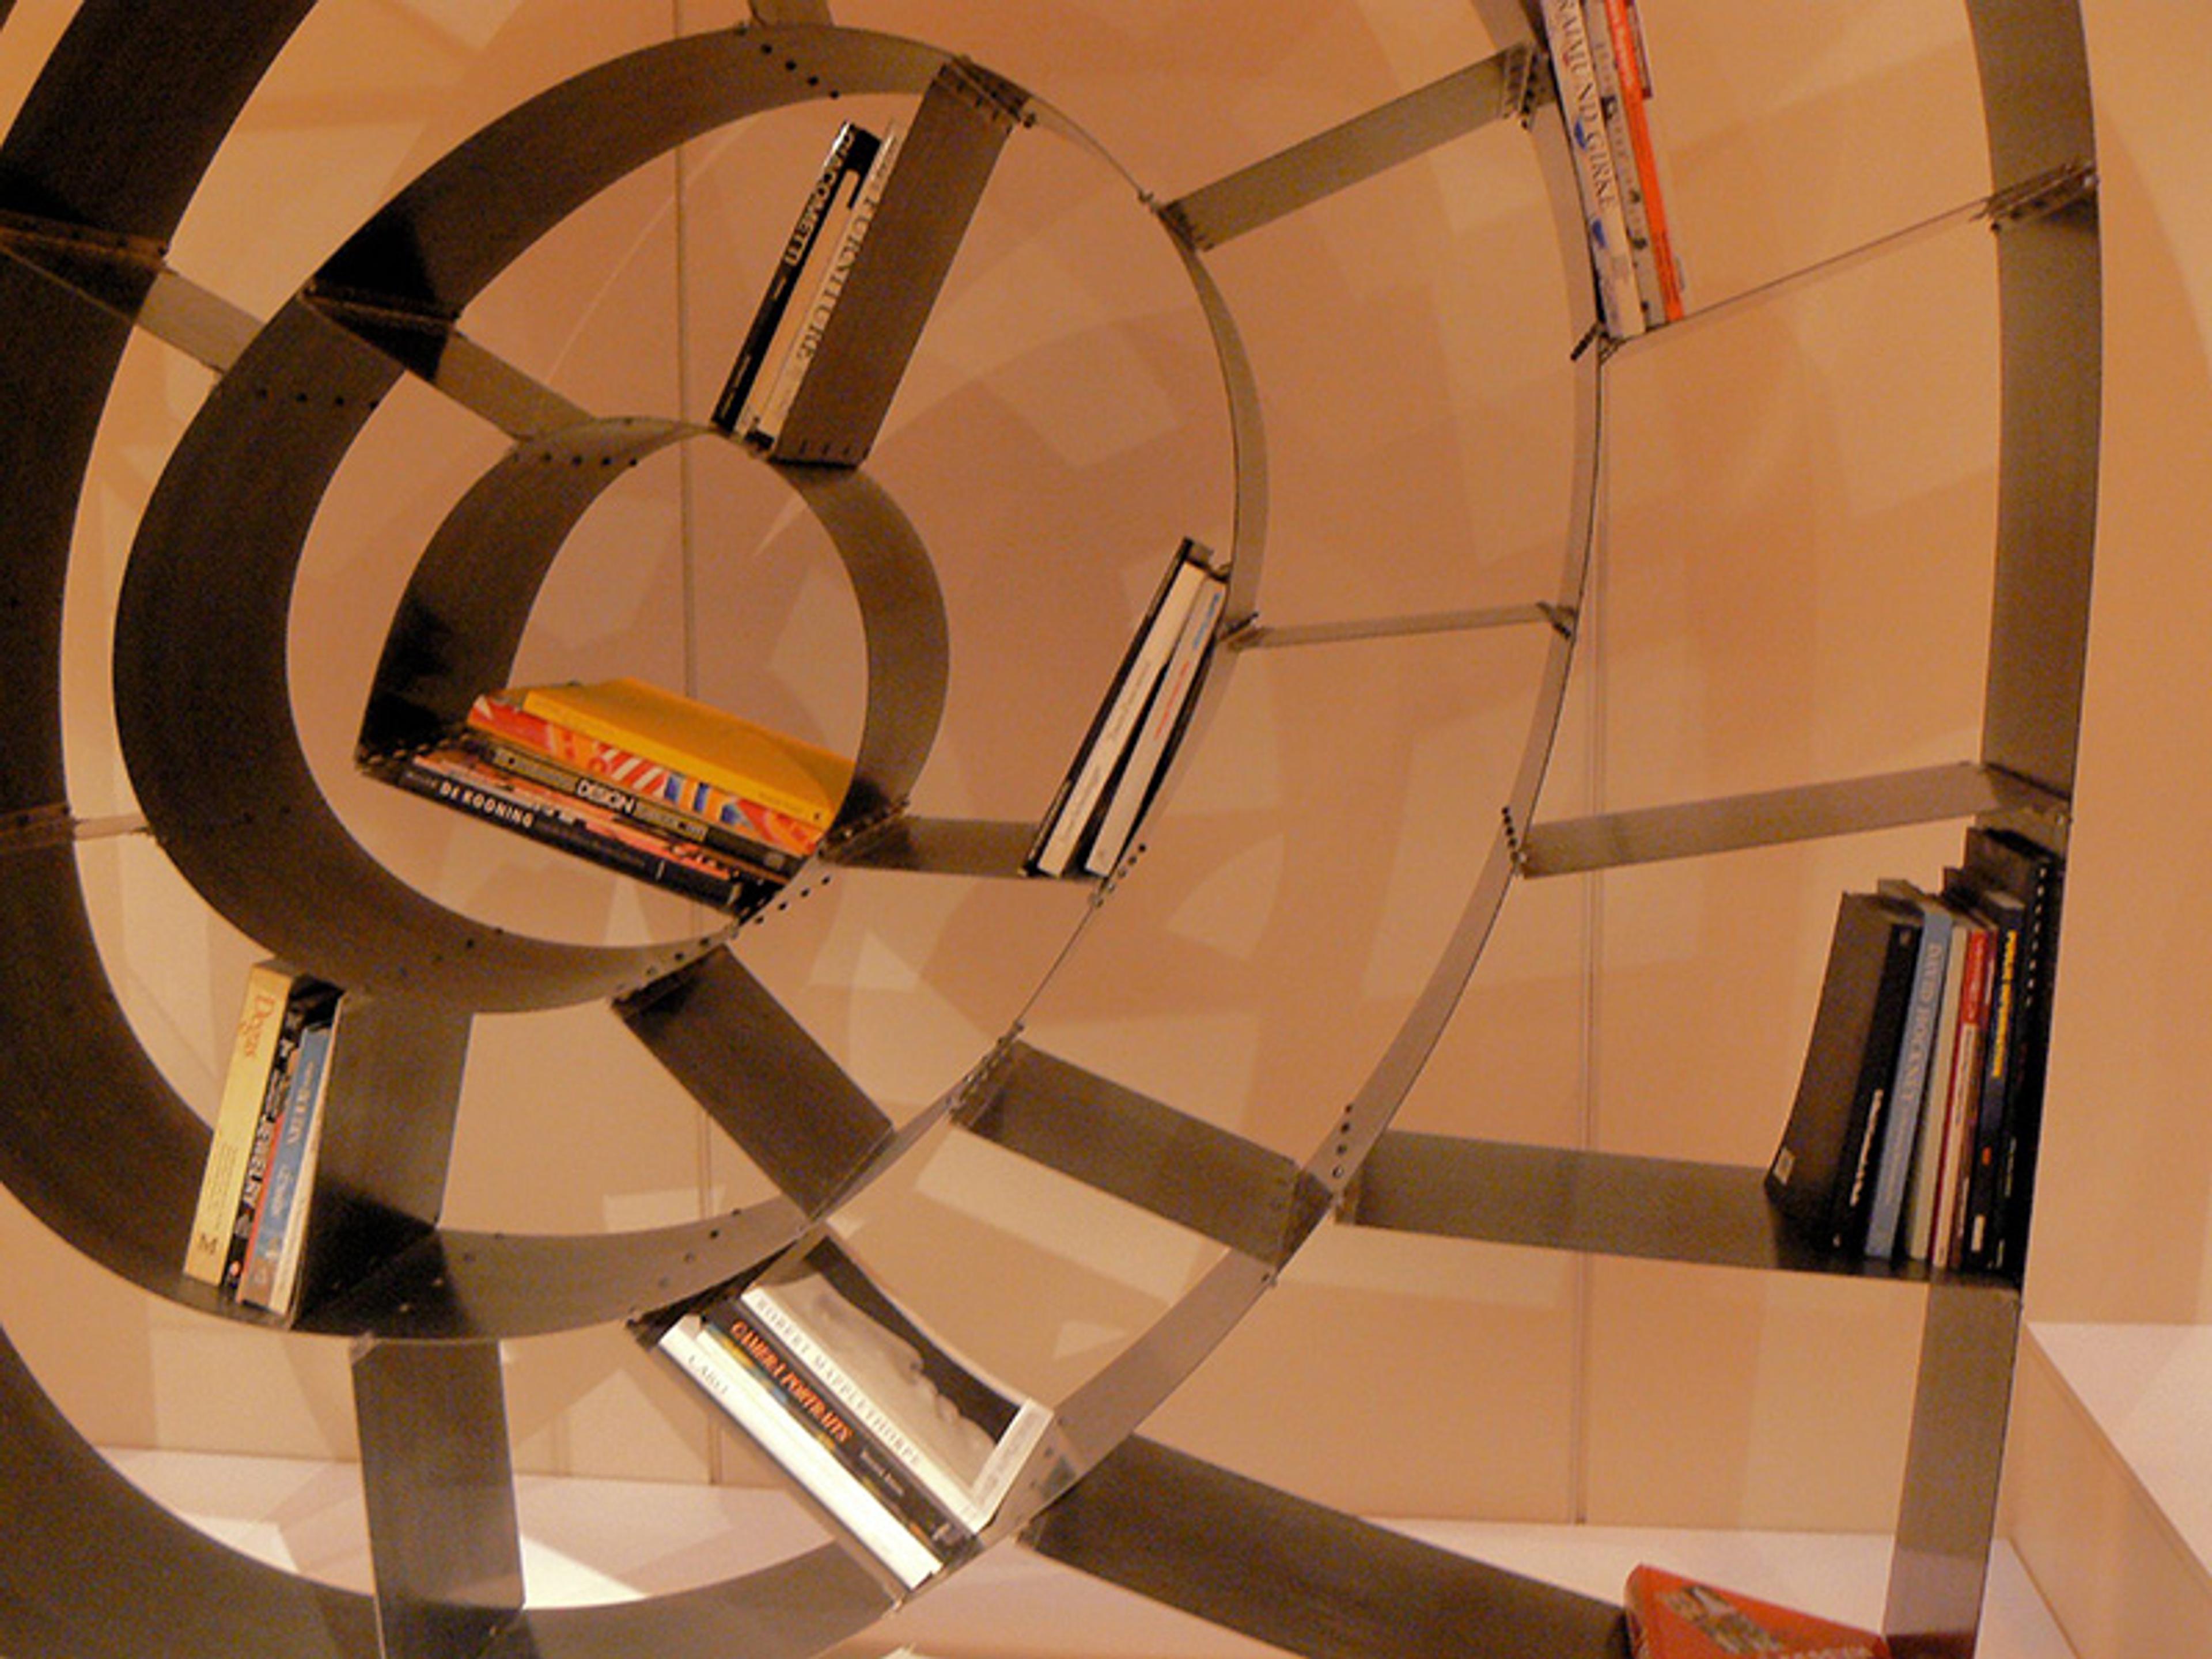 A unique bookshelf with a spiral design, holding various books on its shelves. The shelves emanate outward from the centre and are made of metal, contrasting against a light-coloured wall in the background.